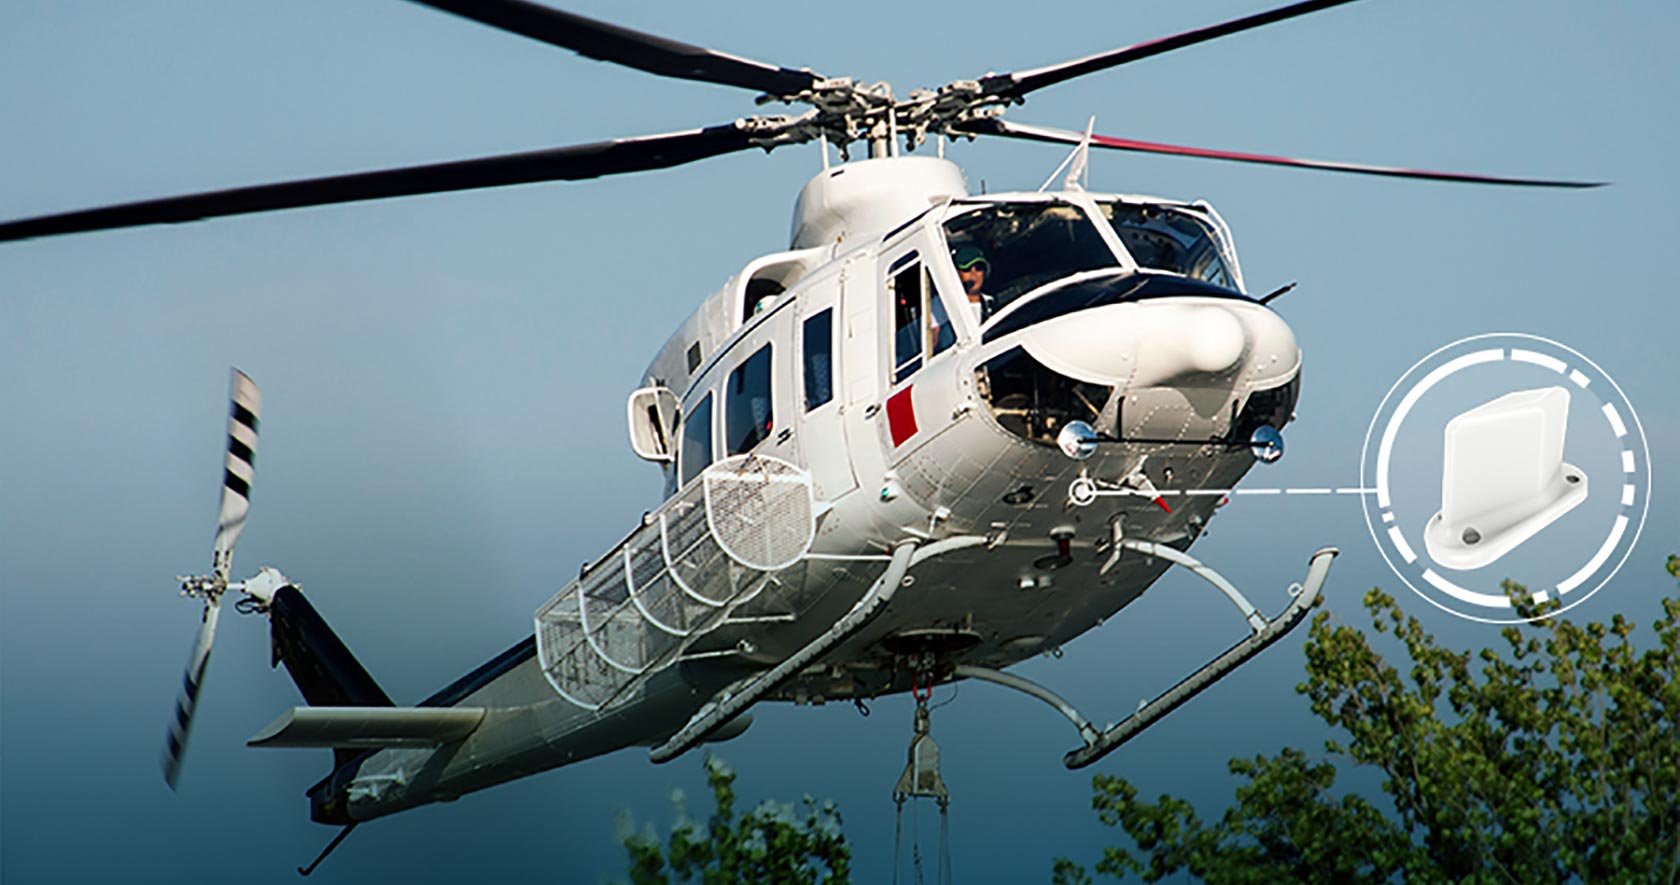 Helicopter providing towing, includes call-out to combo antenna from Hexagon | Antcom